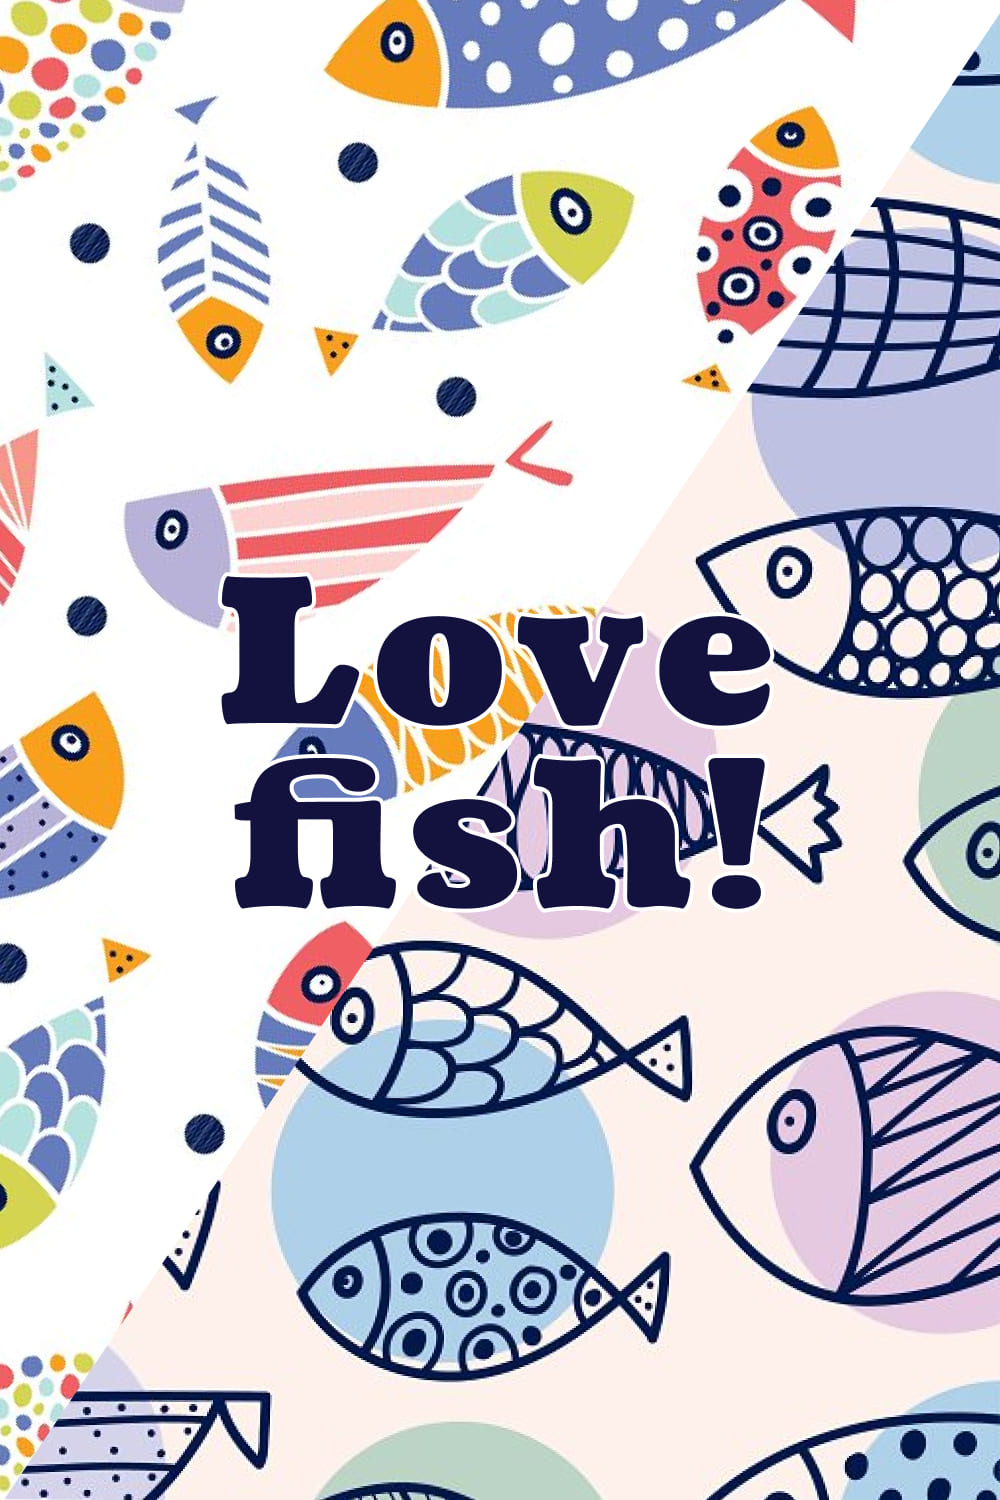 Love Fish! - preview image.